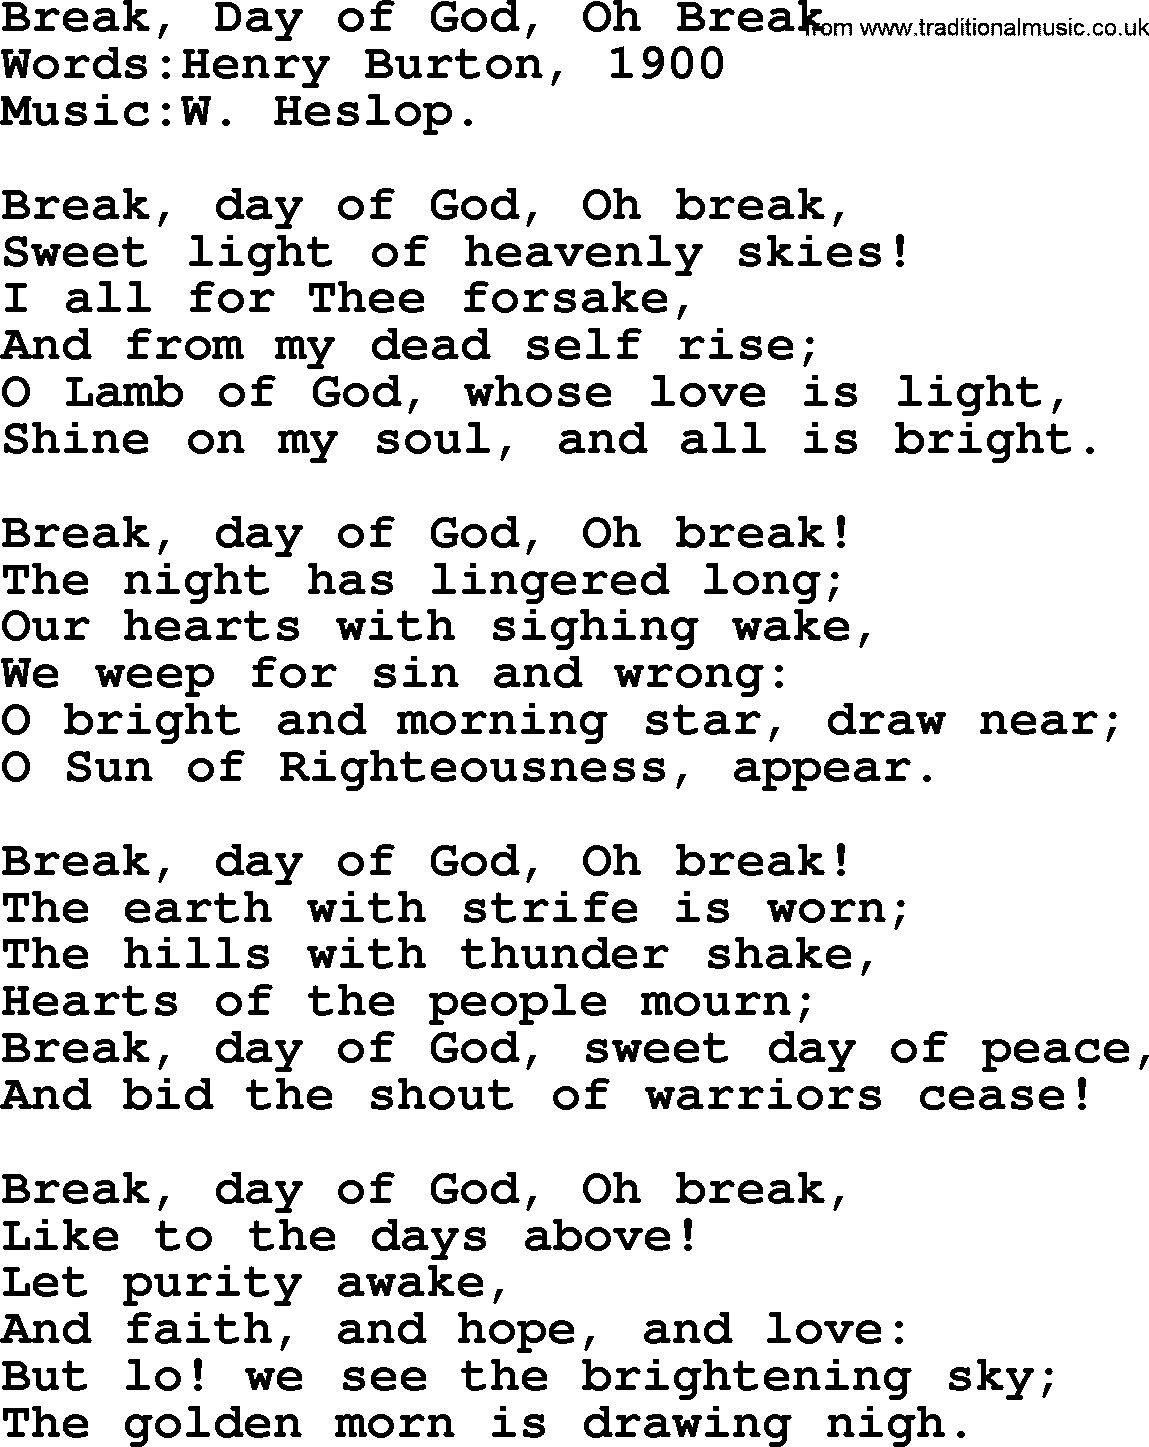 Christian hymns and songs about Jesus' Return(The Second Coming): Break, Day Of God, Oh Break, lyrics with PDF